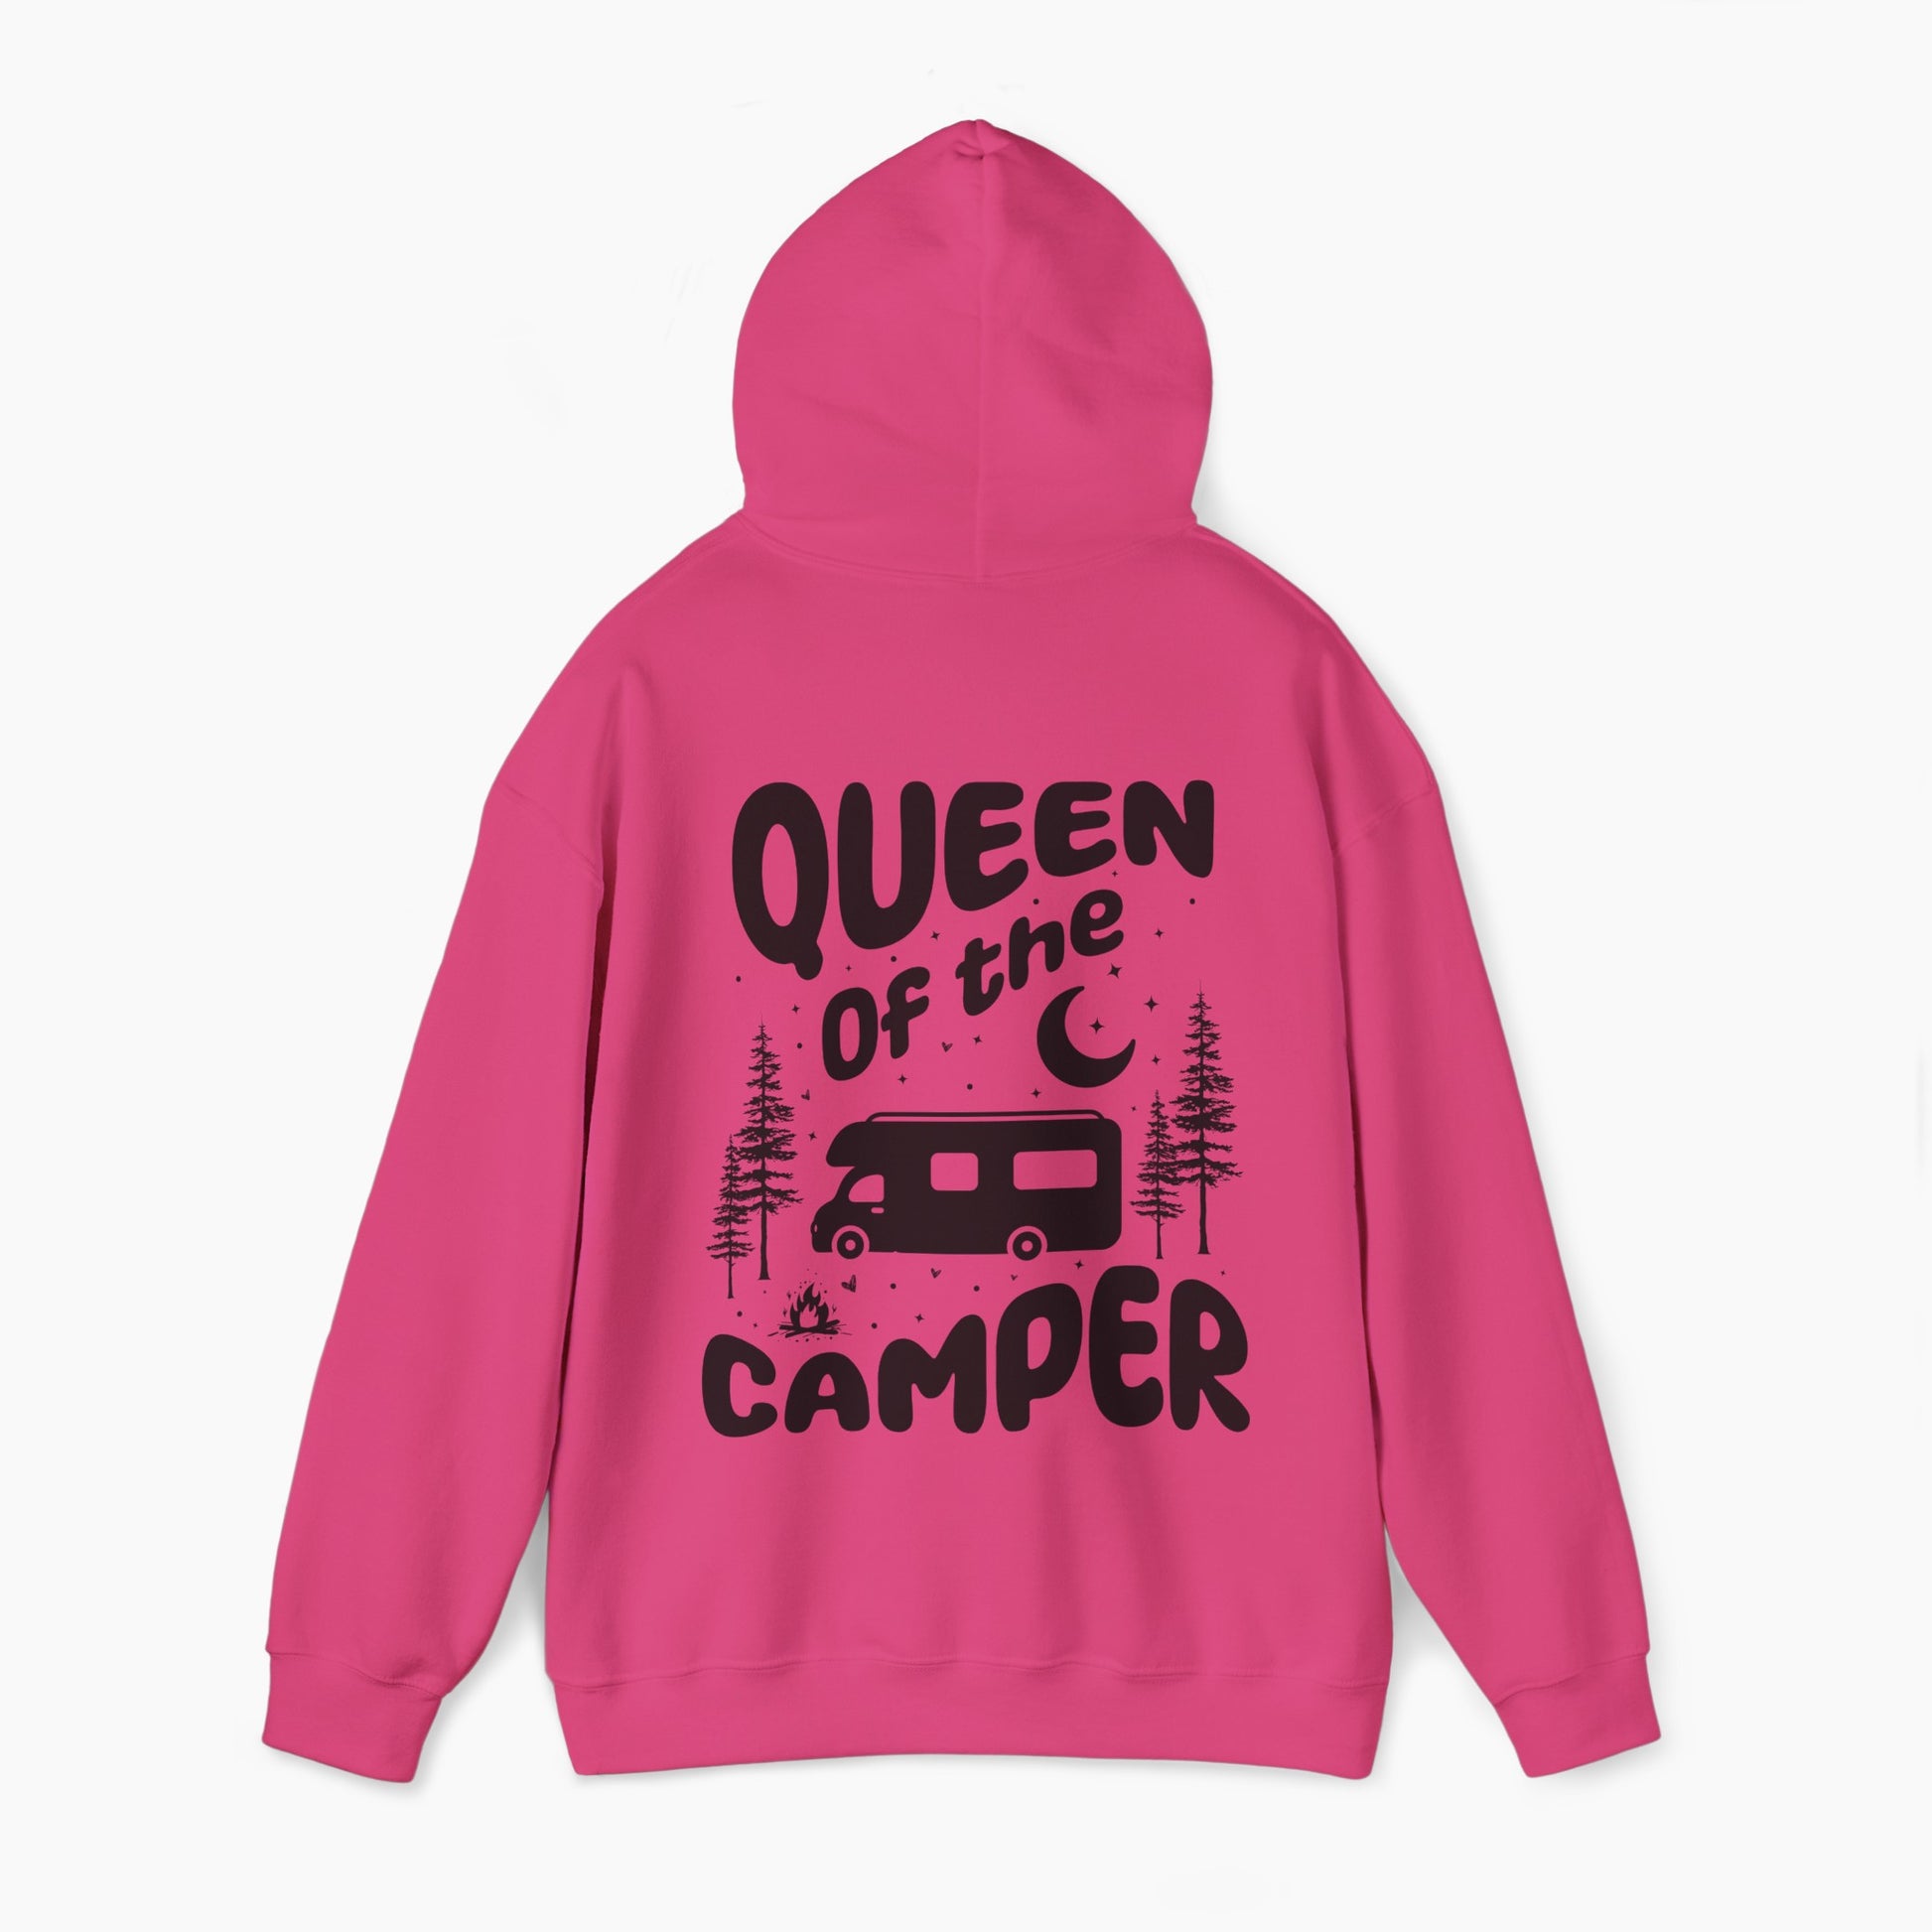 Back of a pink hoodie with the text 'Queen of the Camper' surrounded by elements including a camping van, stars, trees, and a campfire, on a plain background.